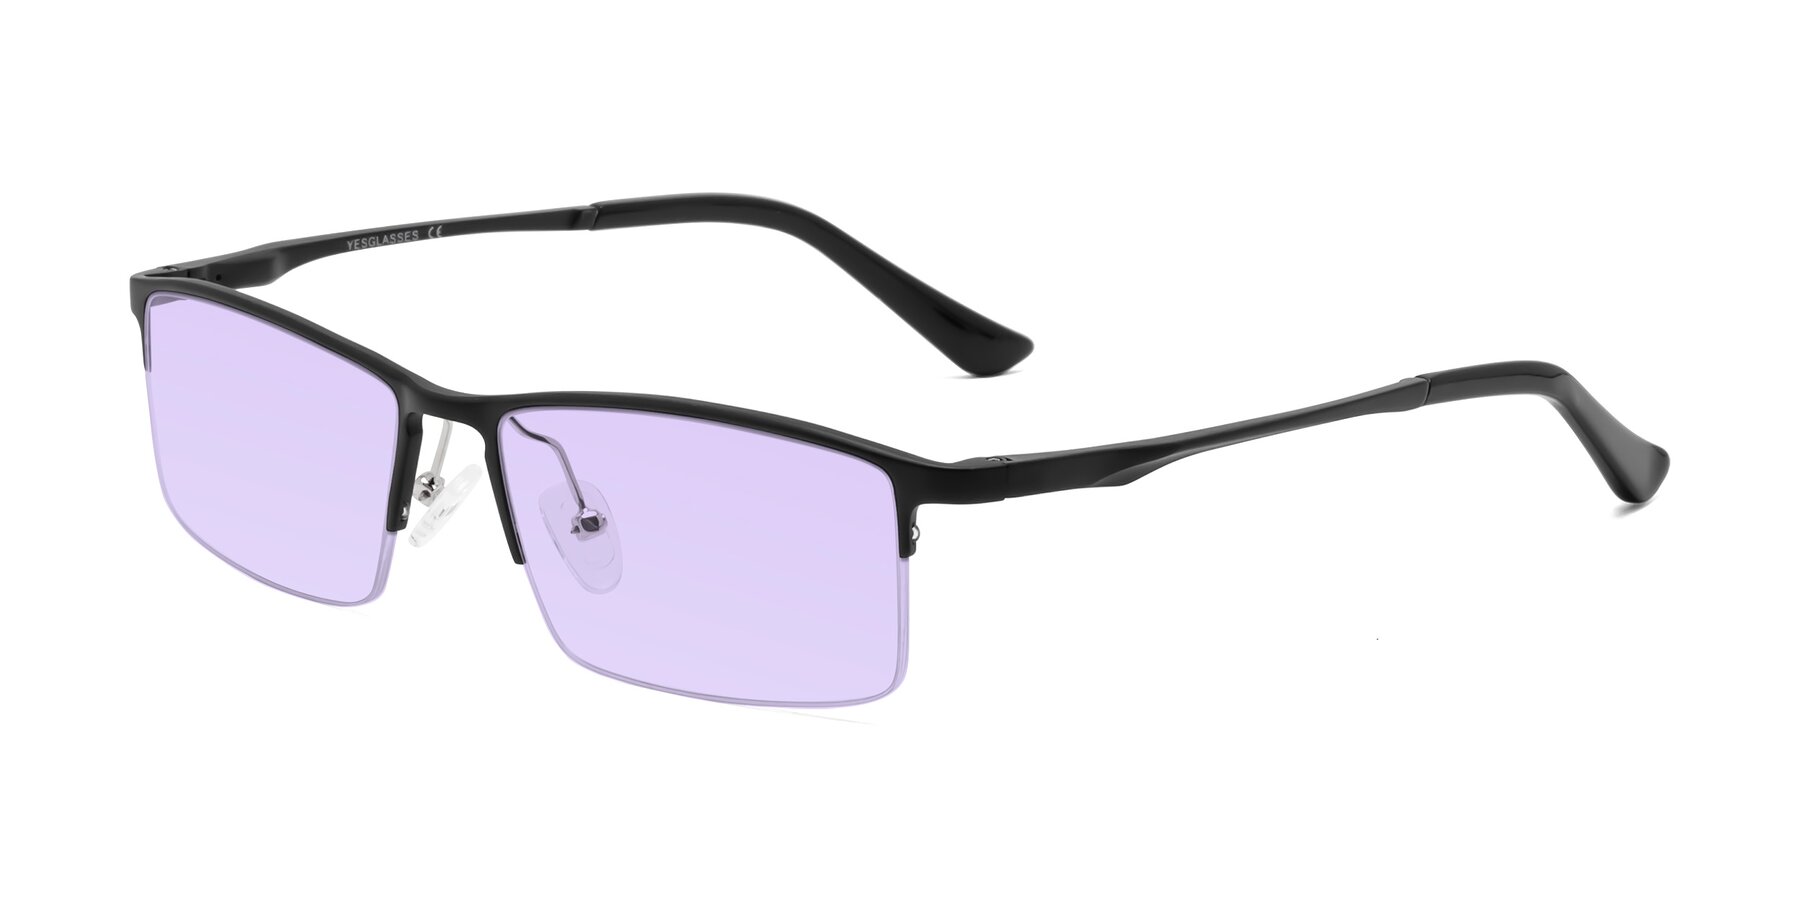 Angle of CX6263 in Black with Light Purple Tinted Lenses